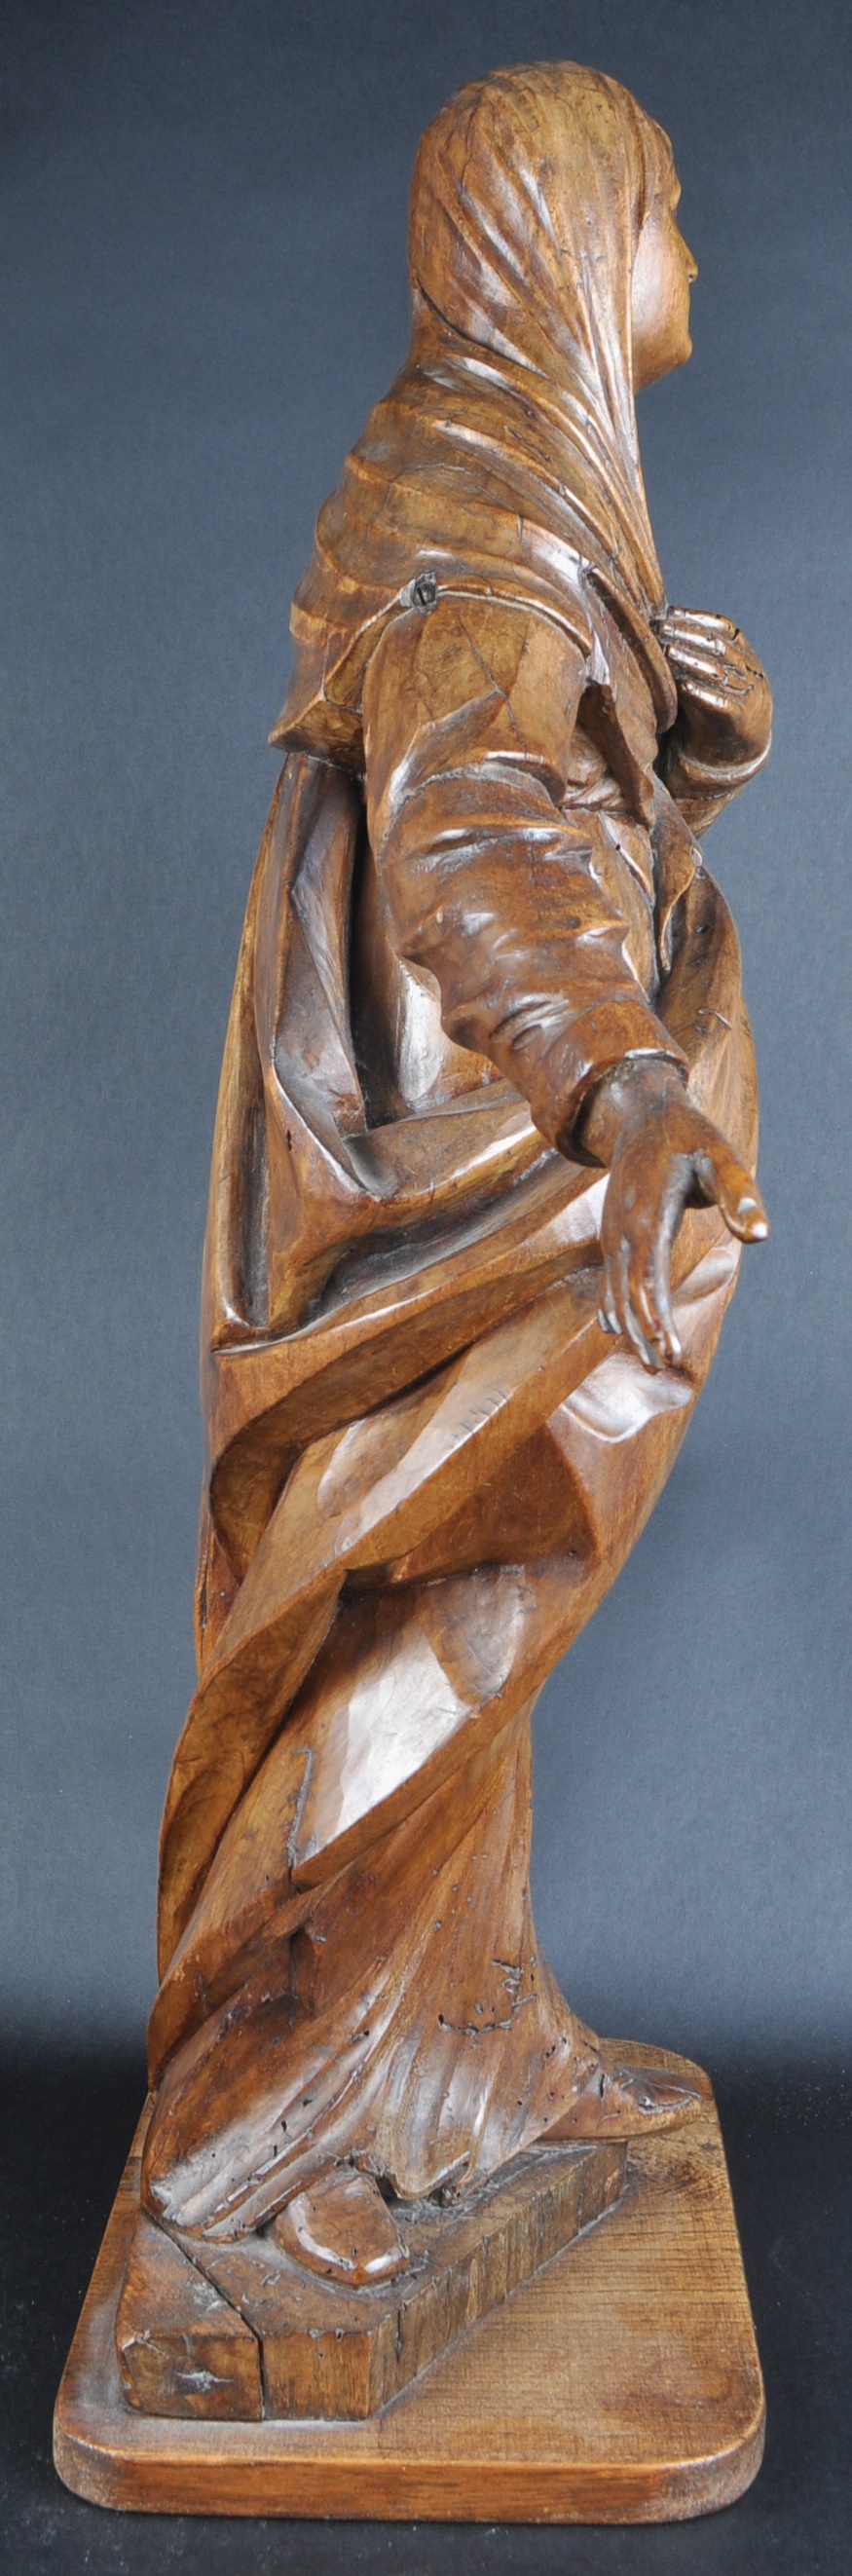 18TH CENTURY CARVED RELIGIOUS STATUE OF VIRGIN MARY - Image 6 of 6